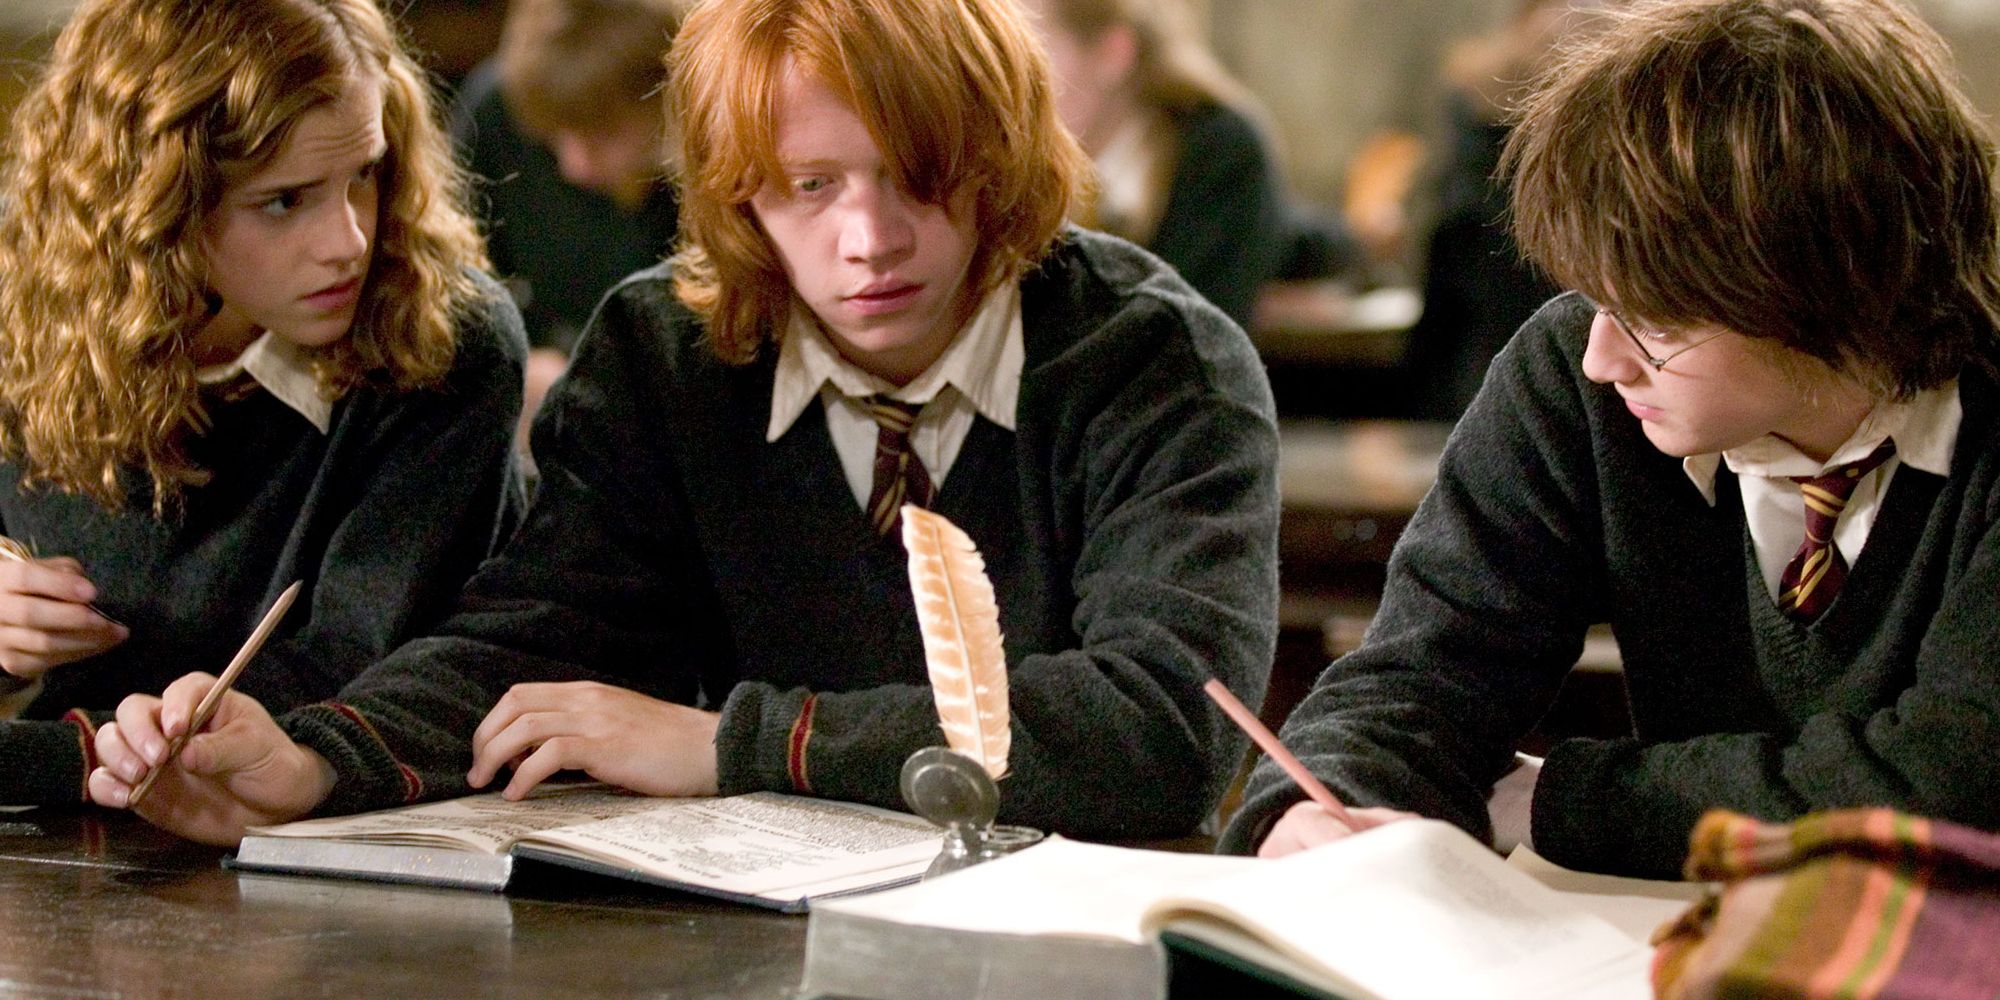 Harry, Ron, and Hermione studying in Harry Potter